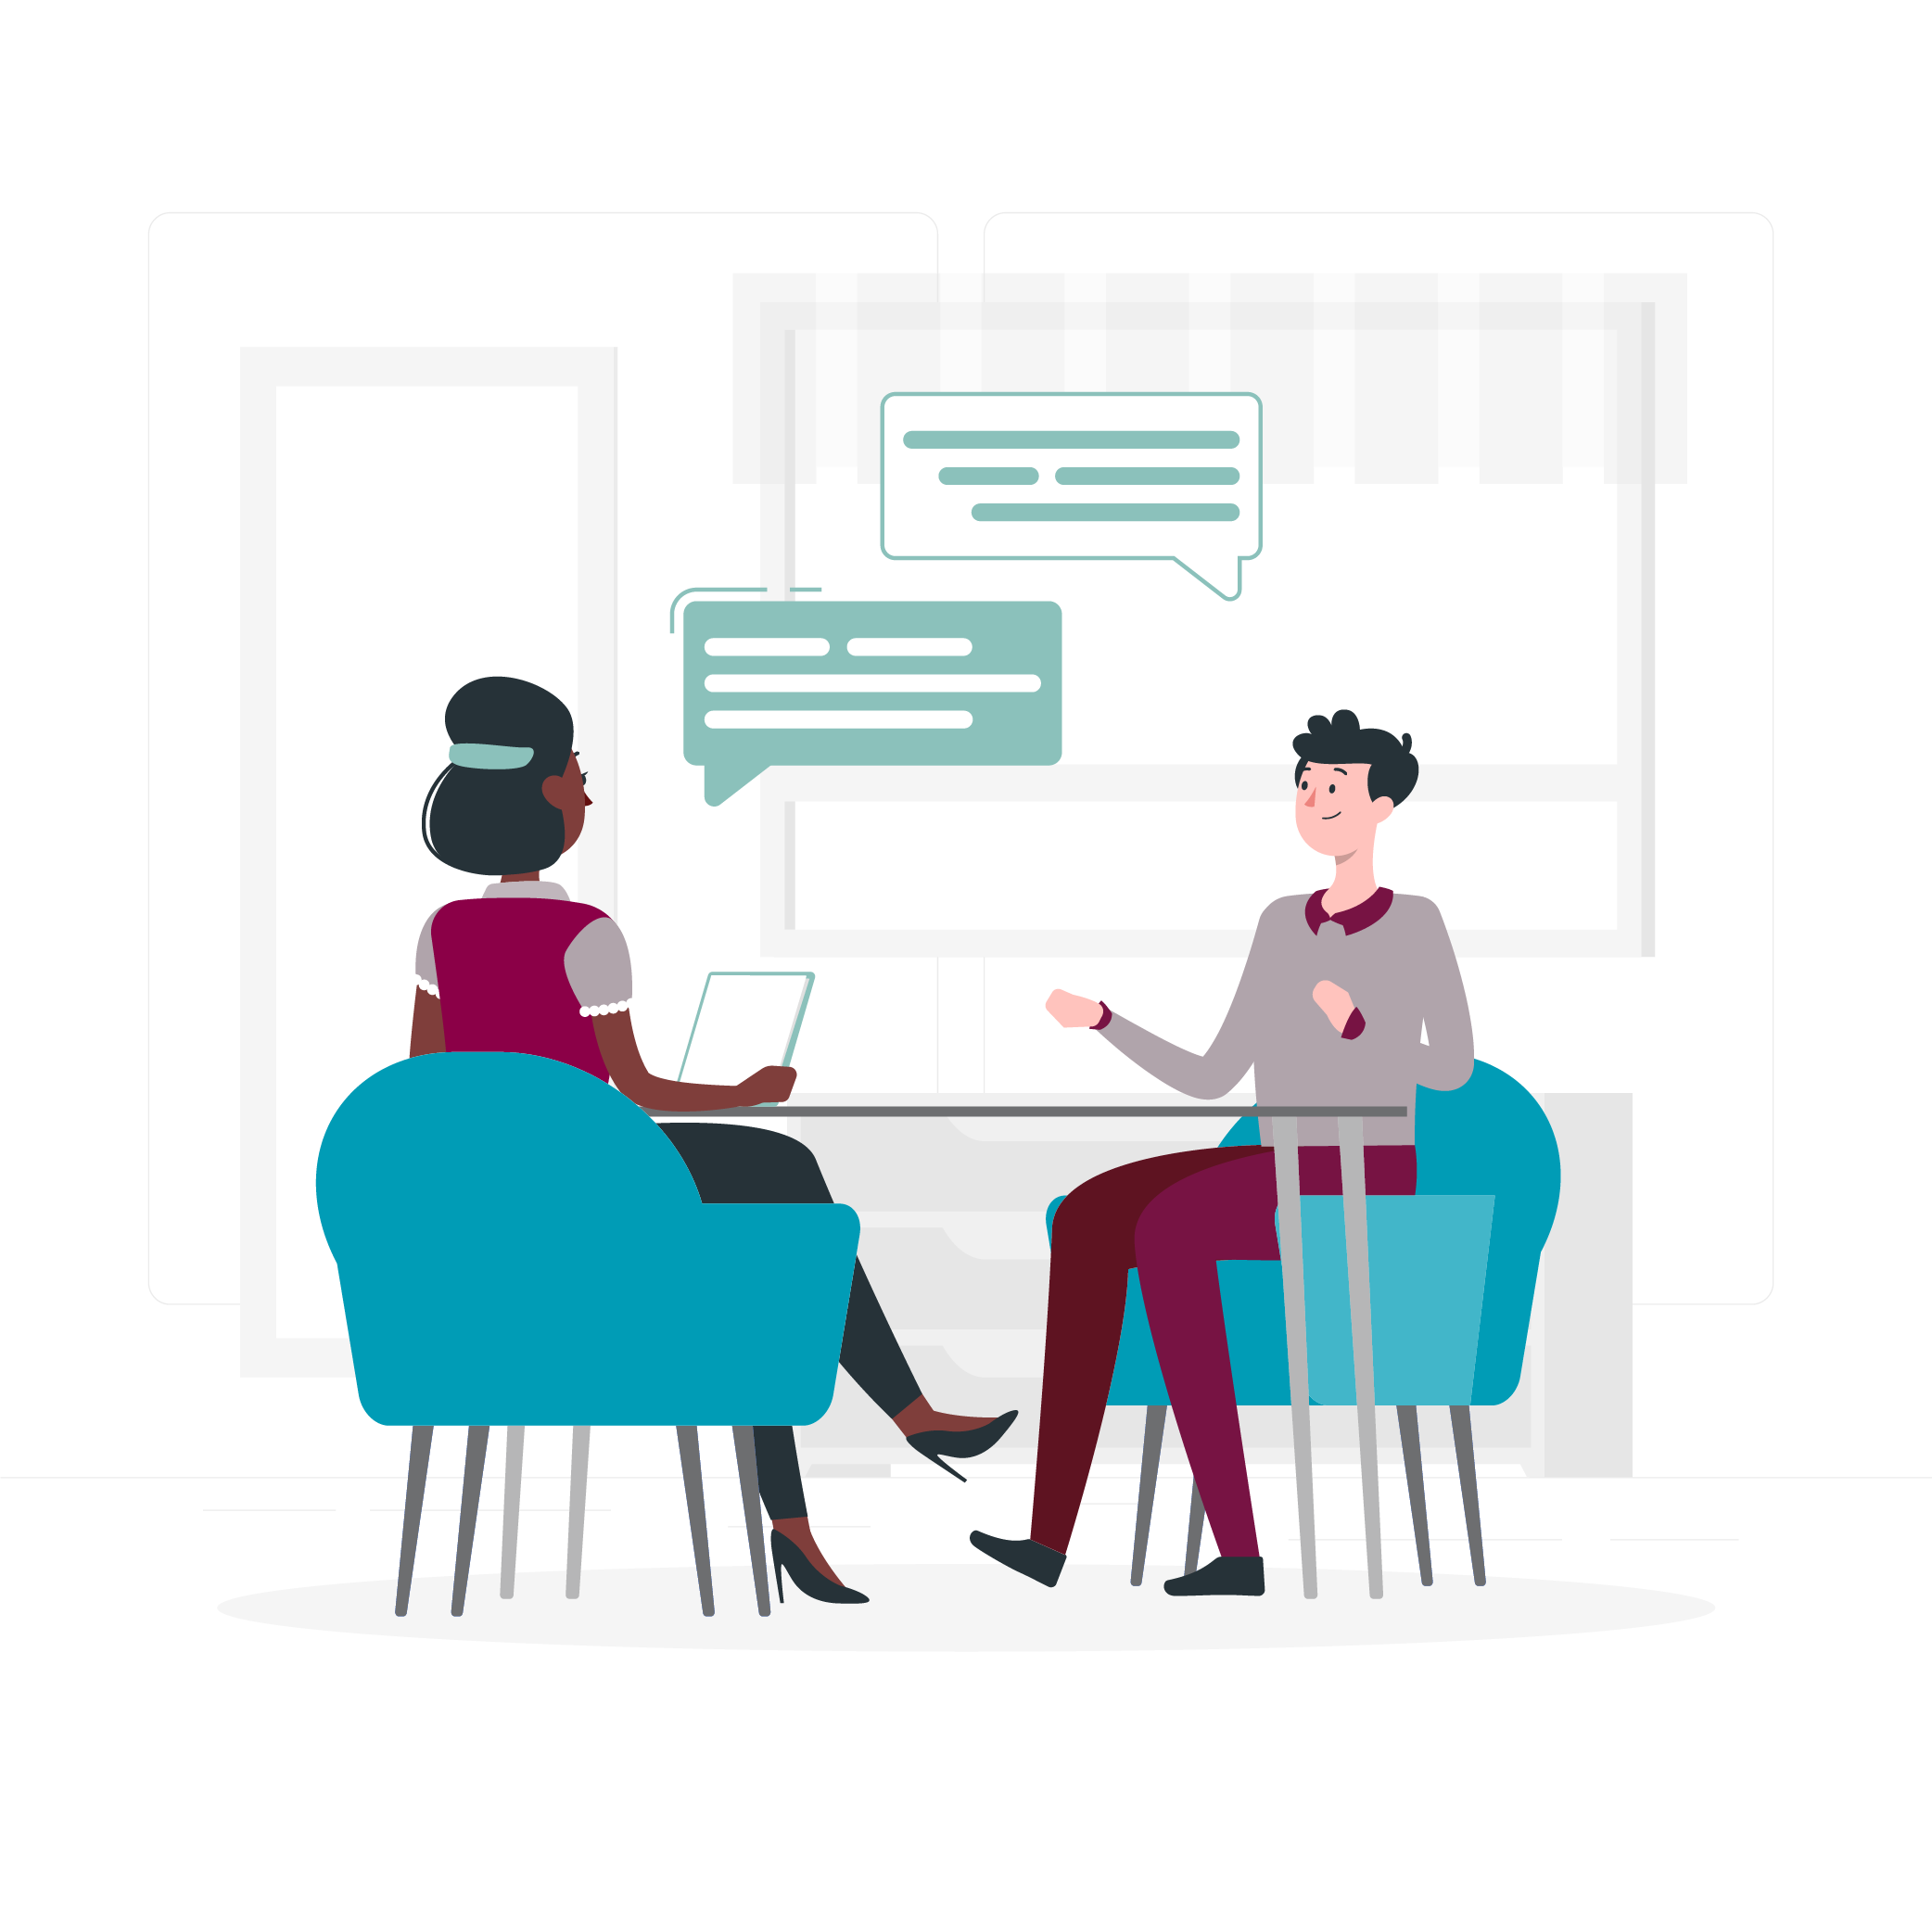 Illustration of two people sitting at a table having a discussion